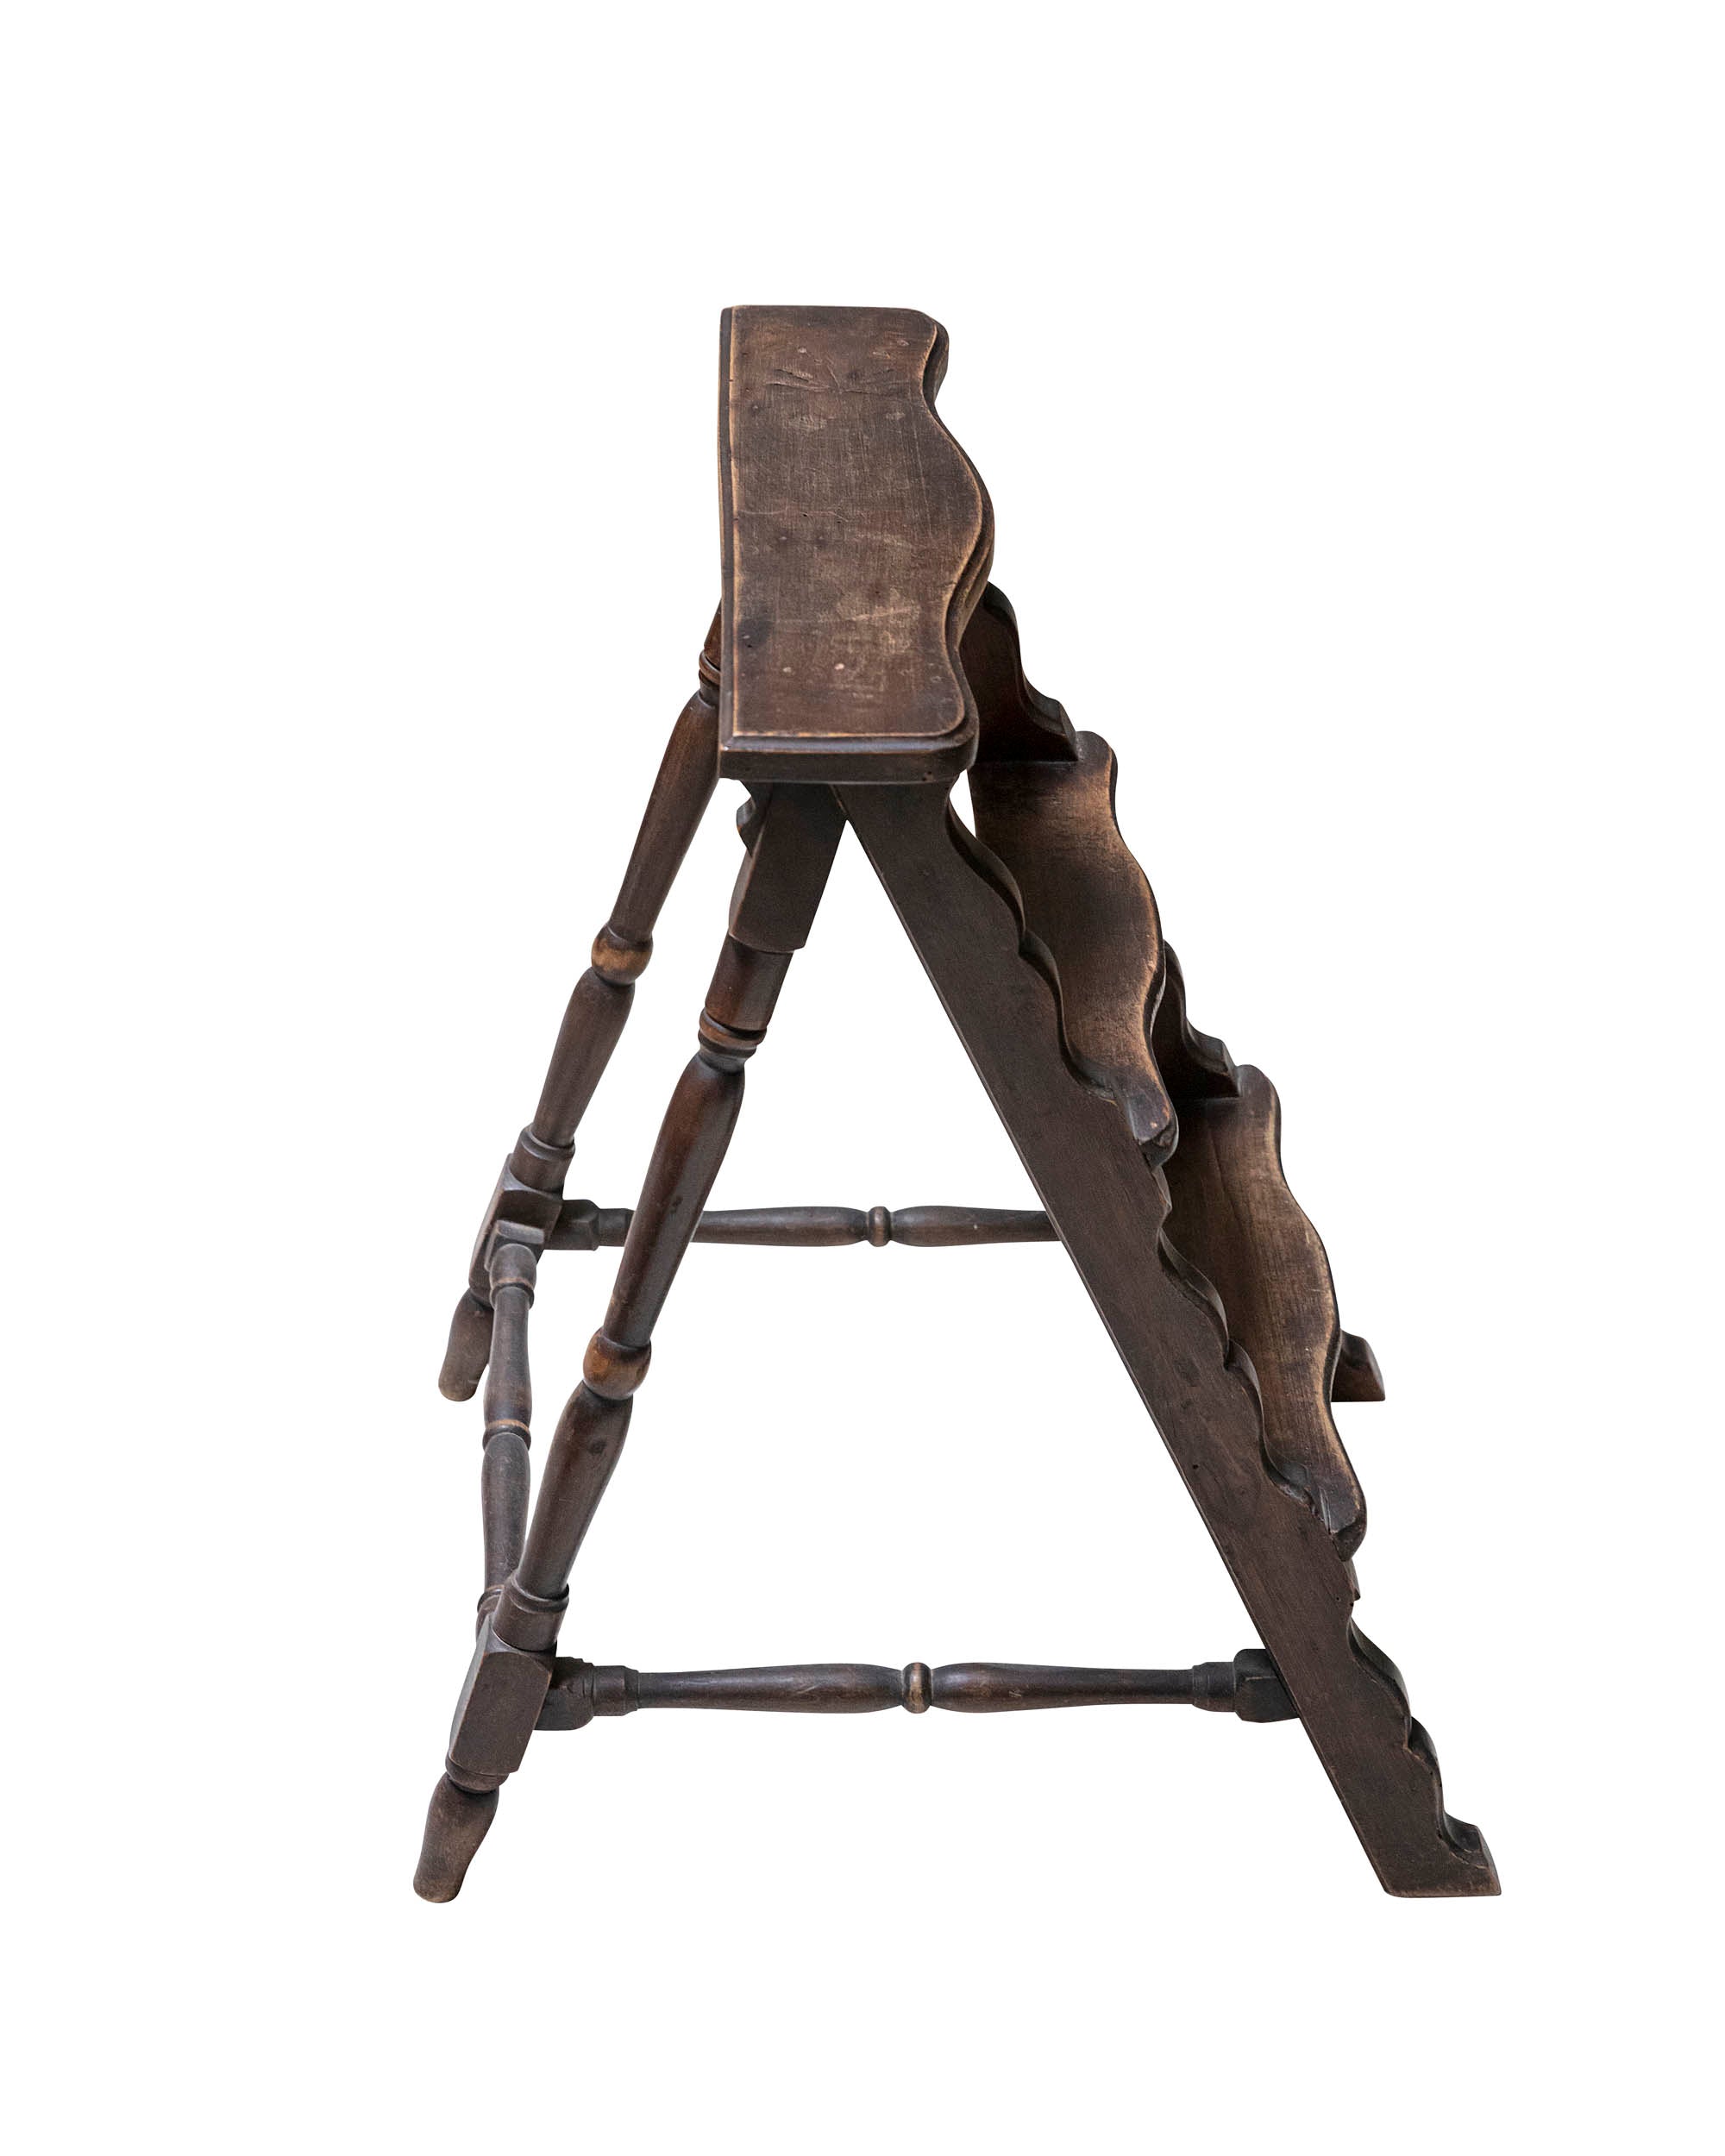 Small wooden library ladder